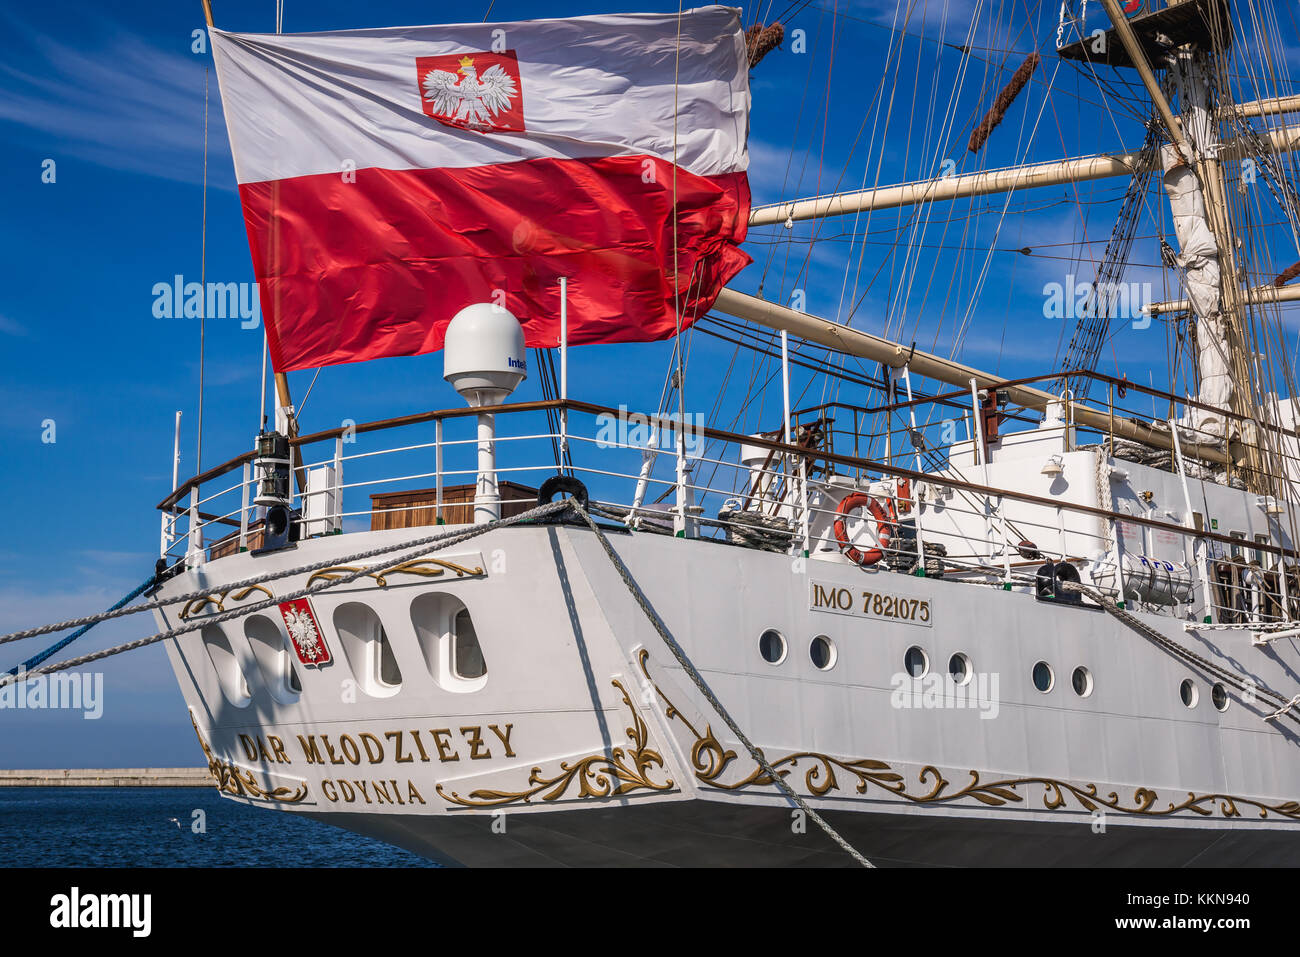 Sail training ship Dar Mlodziezy (Gift of the Youth) in Port of Gdynia city, Pomeranian Voivodeship of Poland Stock Photo